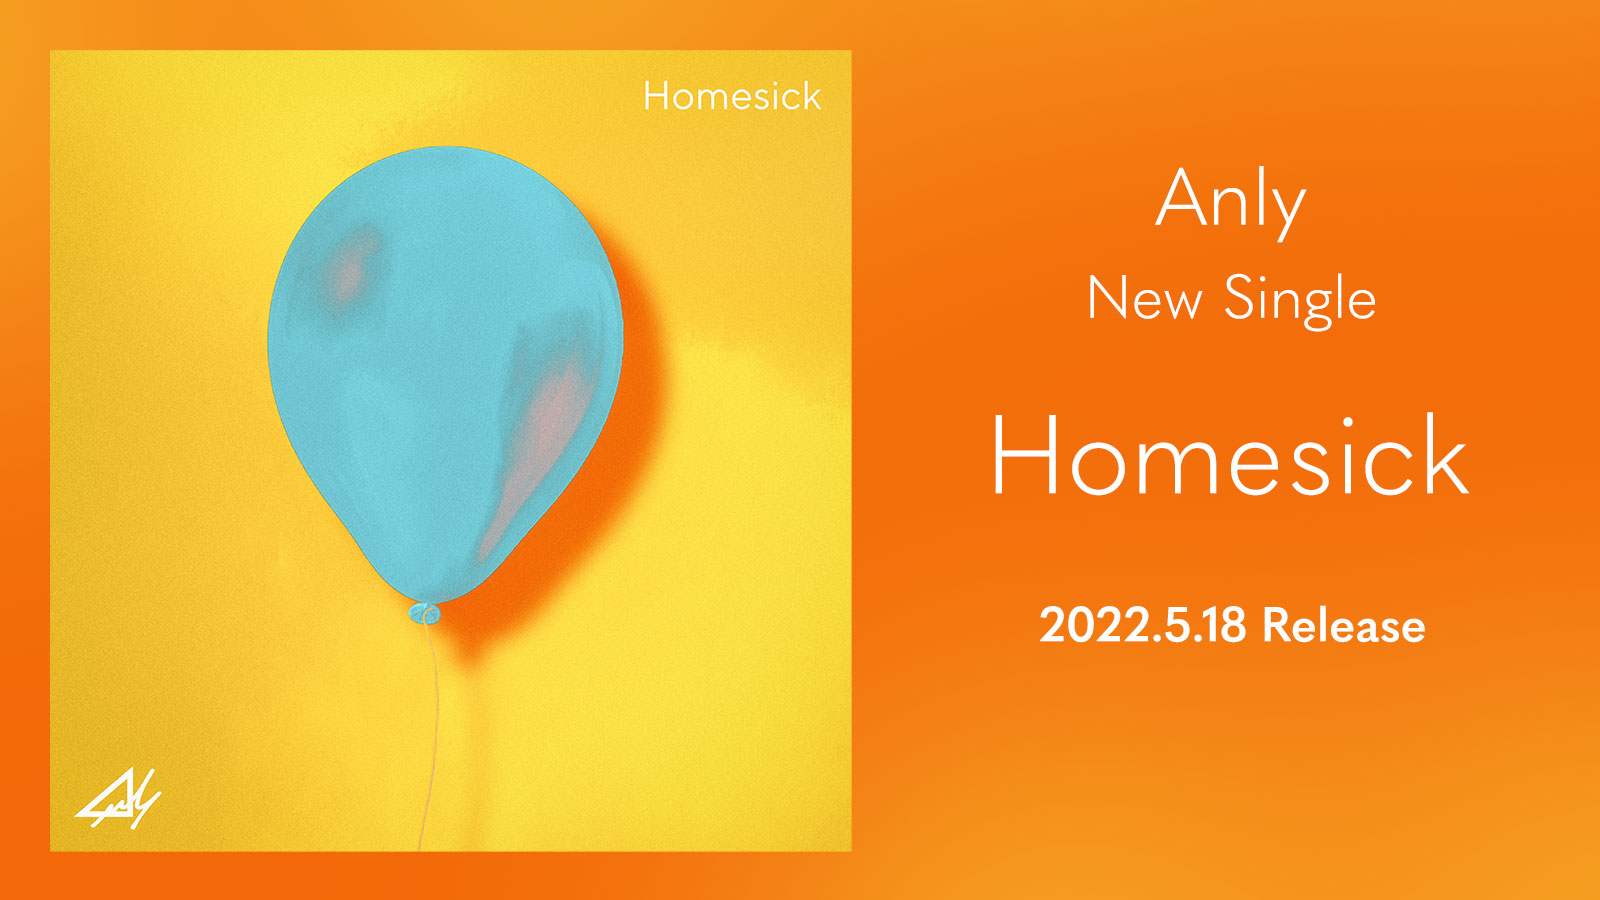 Anly New Single「Homesick」 2022.5.18 Release